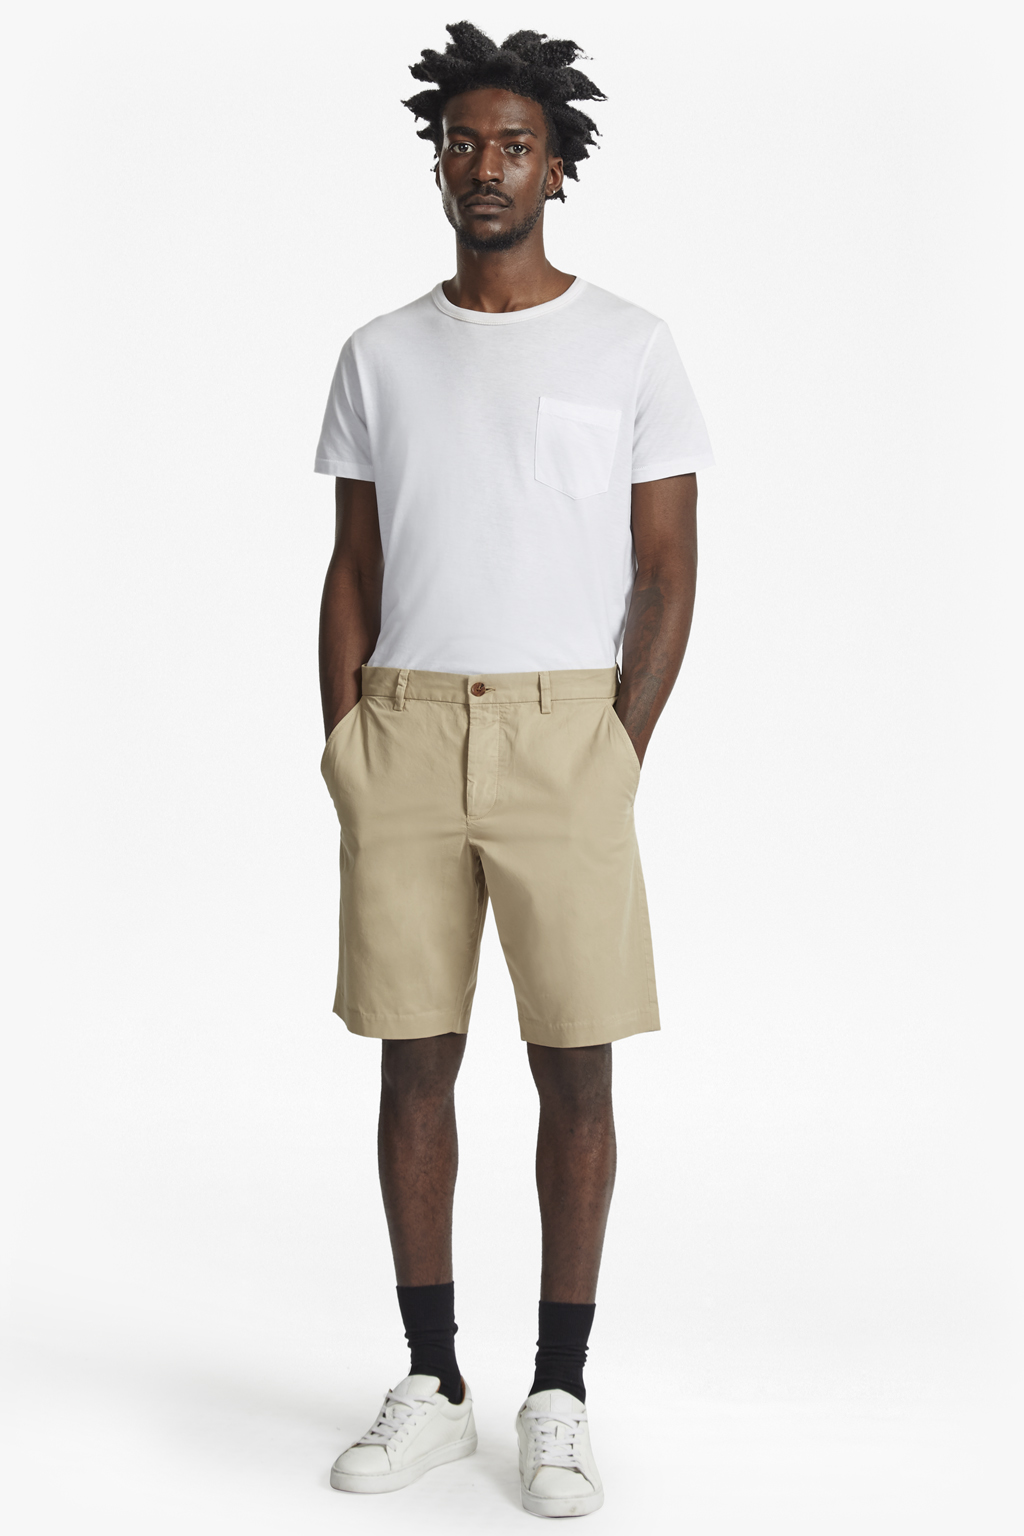 Get that manly look with mens chino shorts